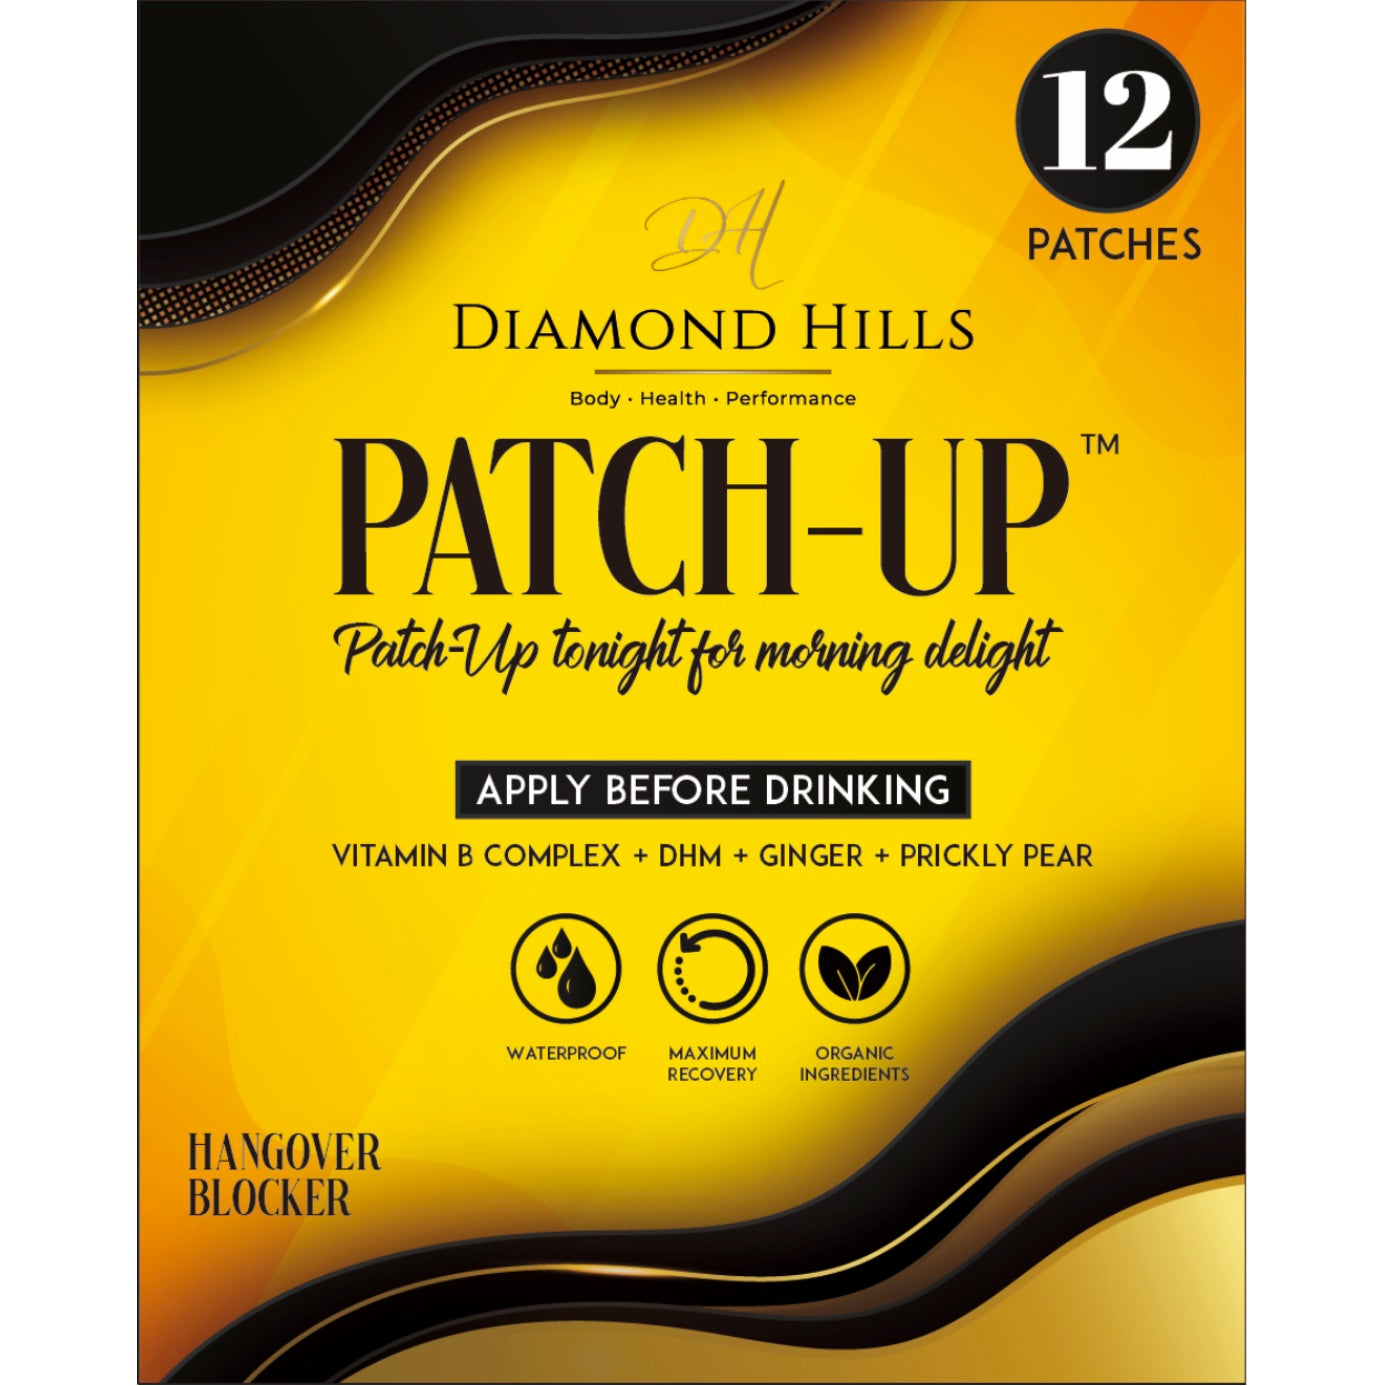 Diamond Hills Patch-Up - 12-Pack Hangover Patches - Maximum Recovery - Waterproof, Organic Ingredients Vitamin B, DHM, Ginger, Prickly Pear